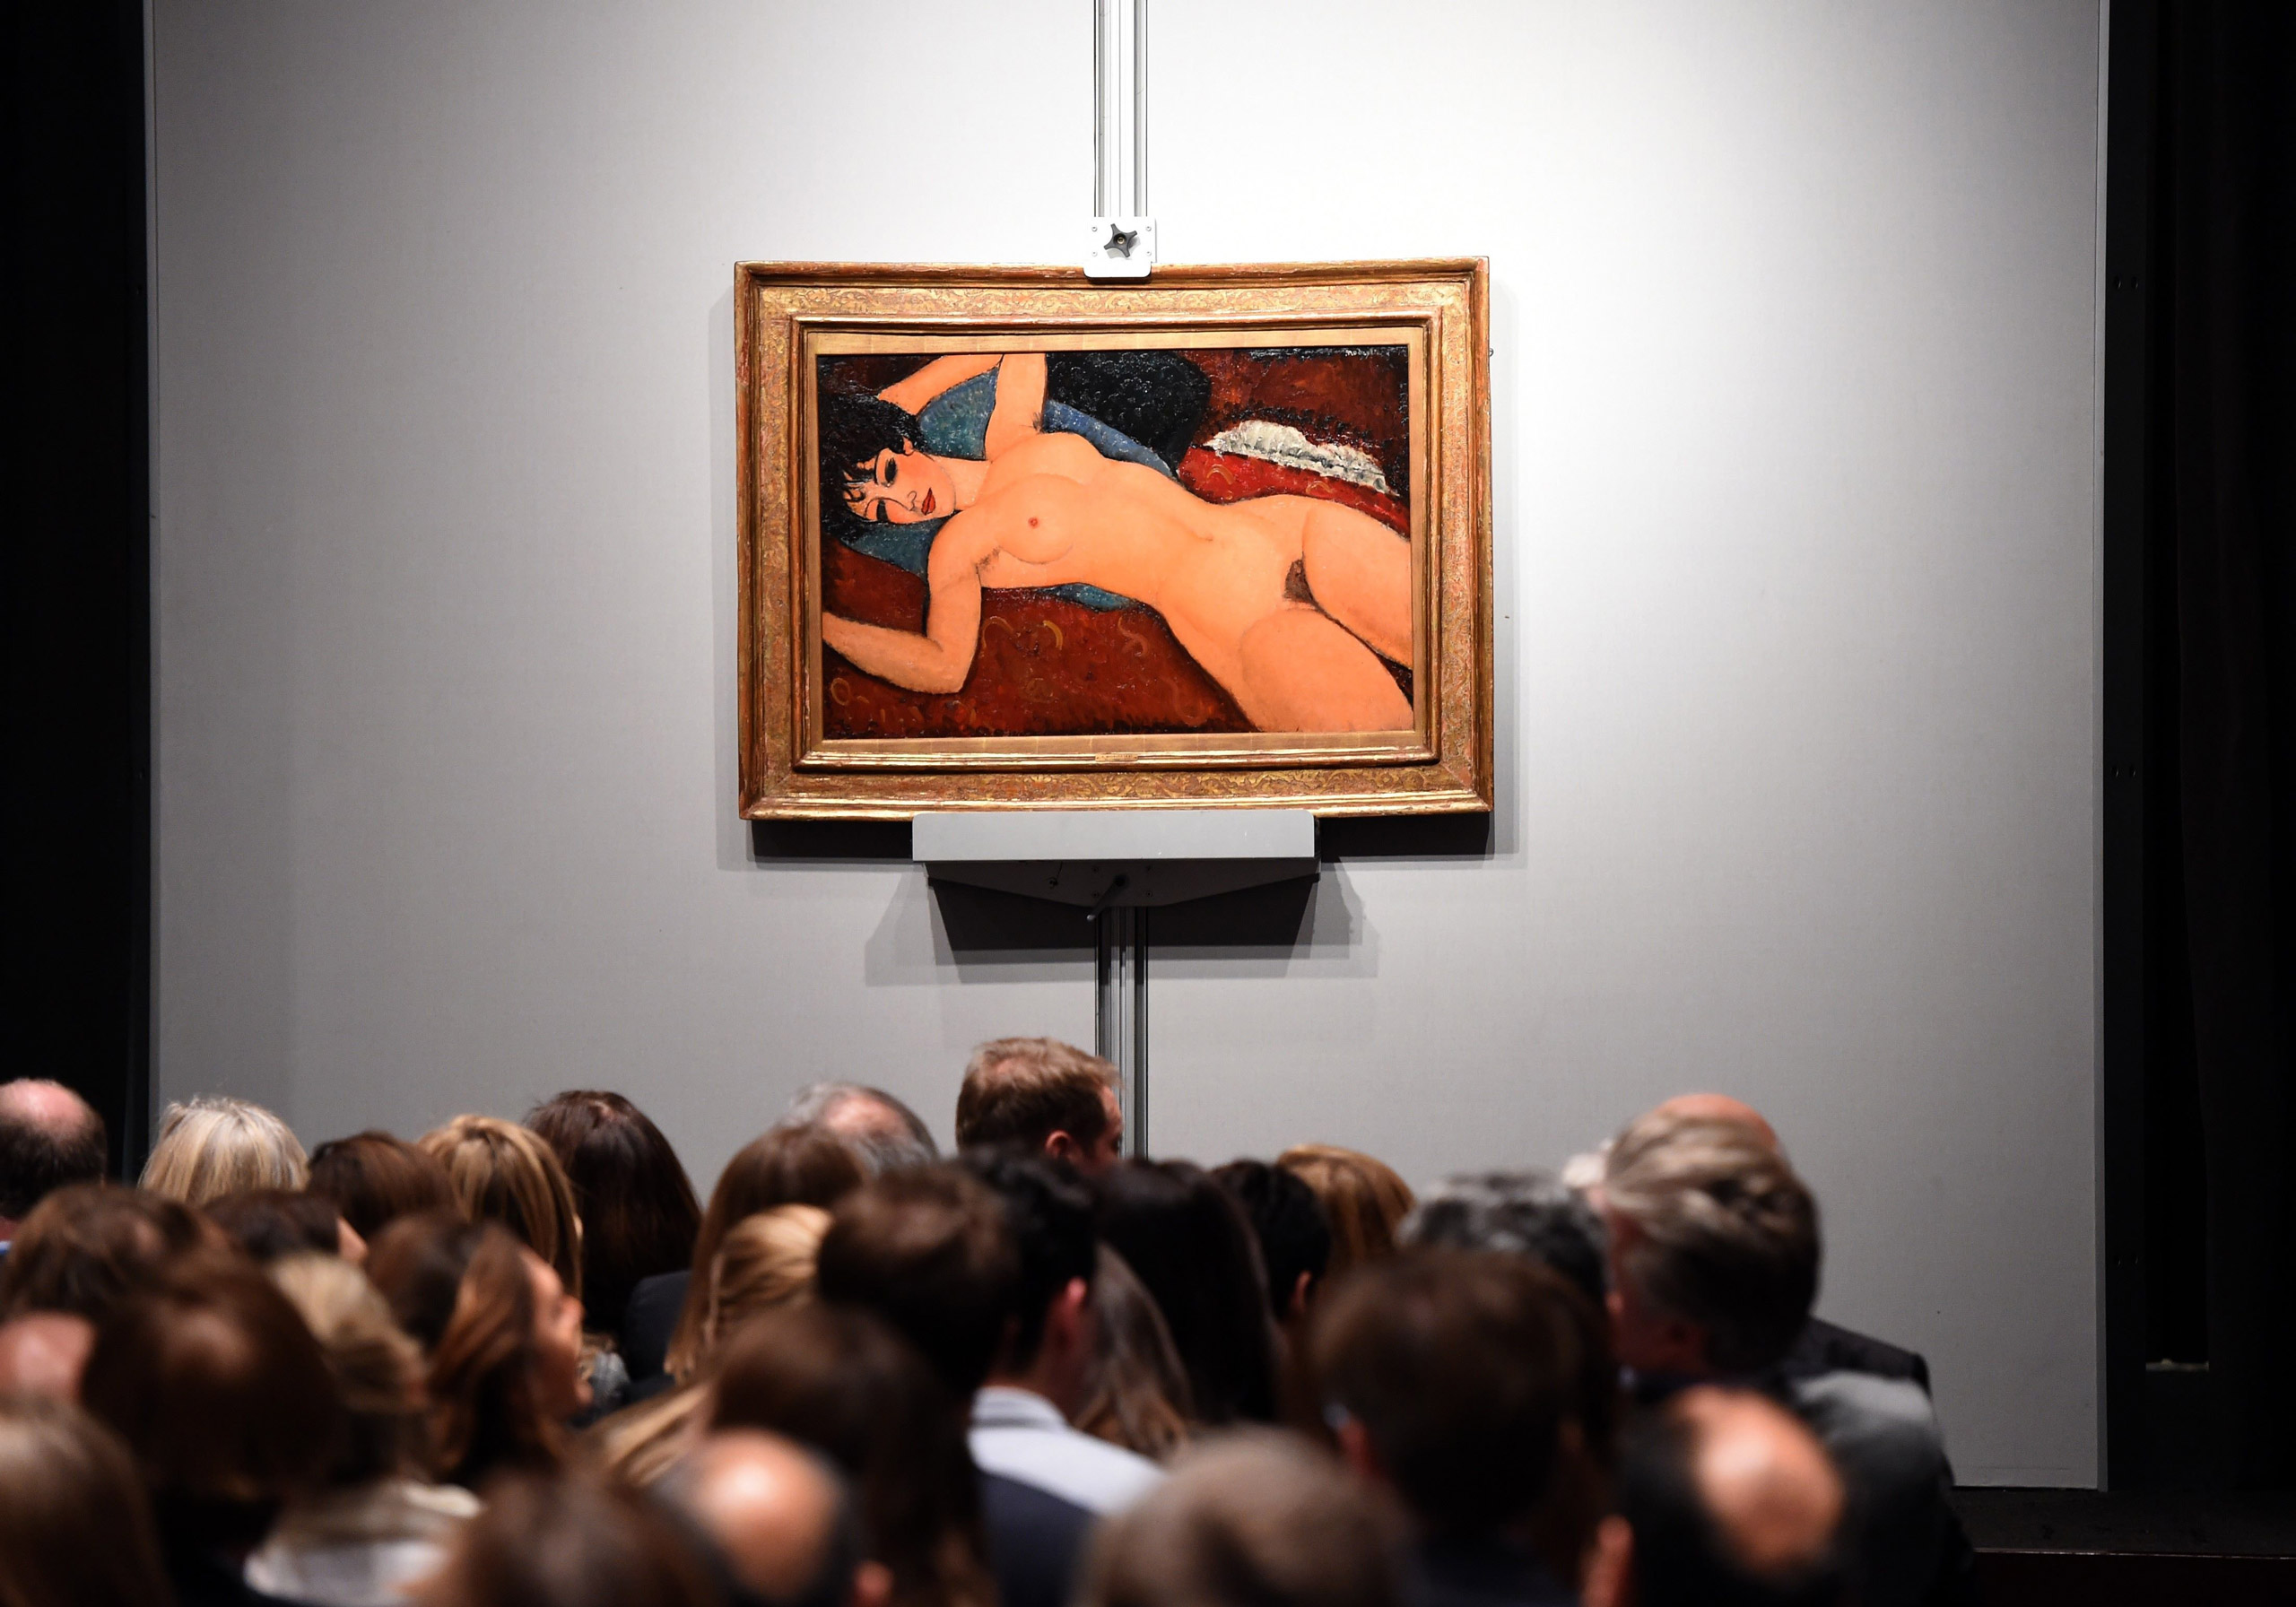 Crowds sit in front of Amedeo Modigliani's "Nu couche" during the "Artist Muse: A Curated Evening Sale" at Christie's in New York on Nov. 9, 2015. (Timothy A. Clary—AFP/Getty Images)